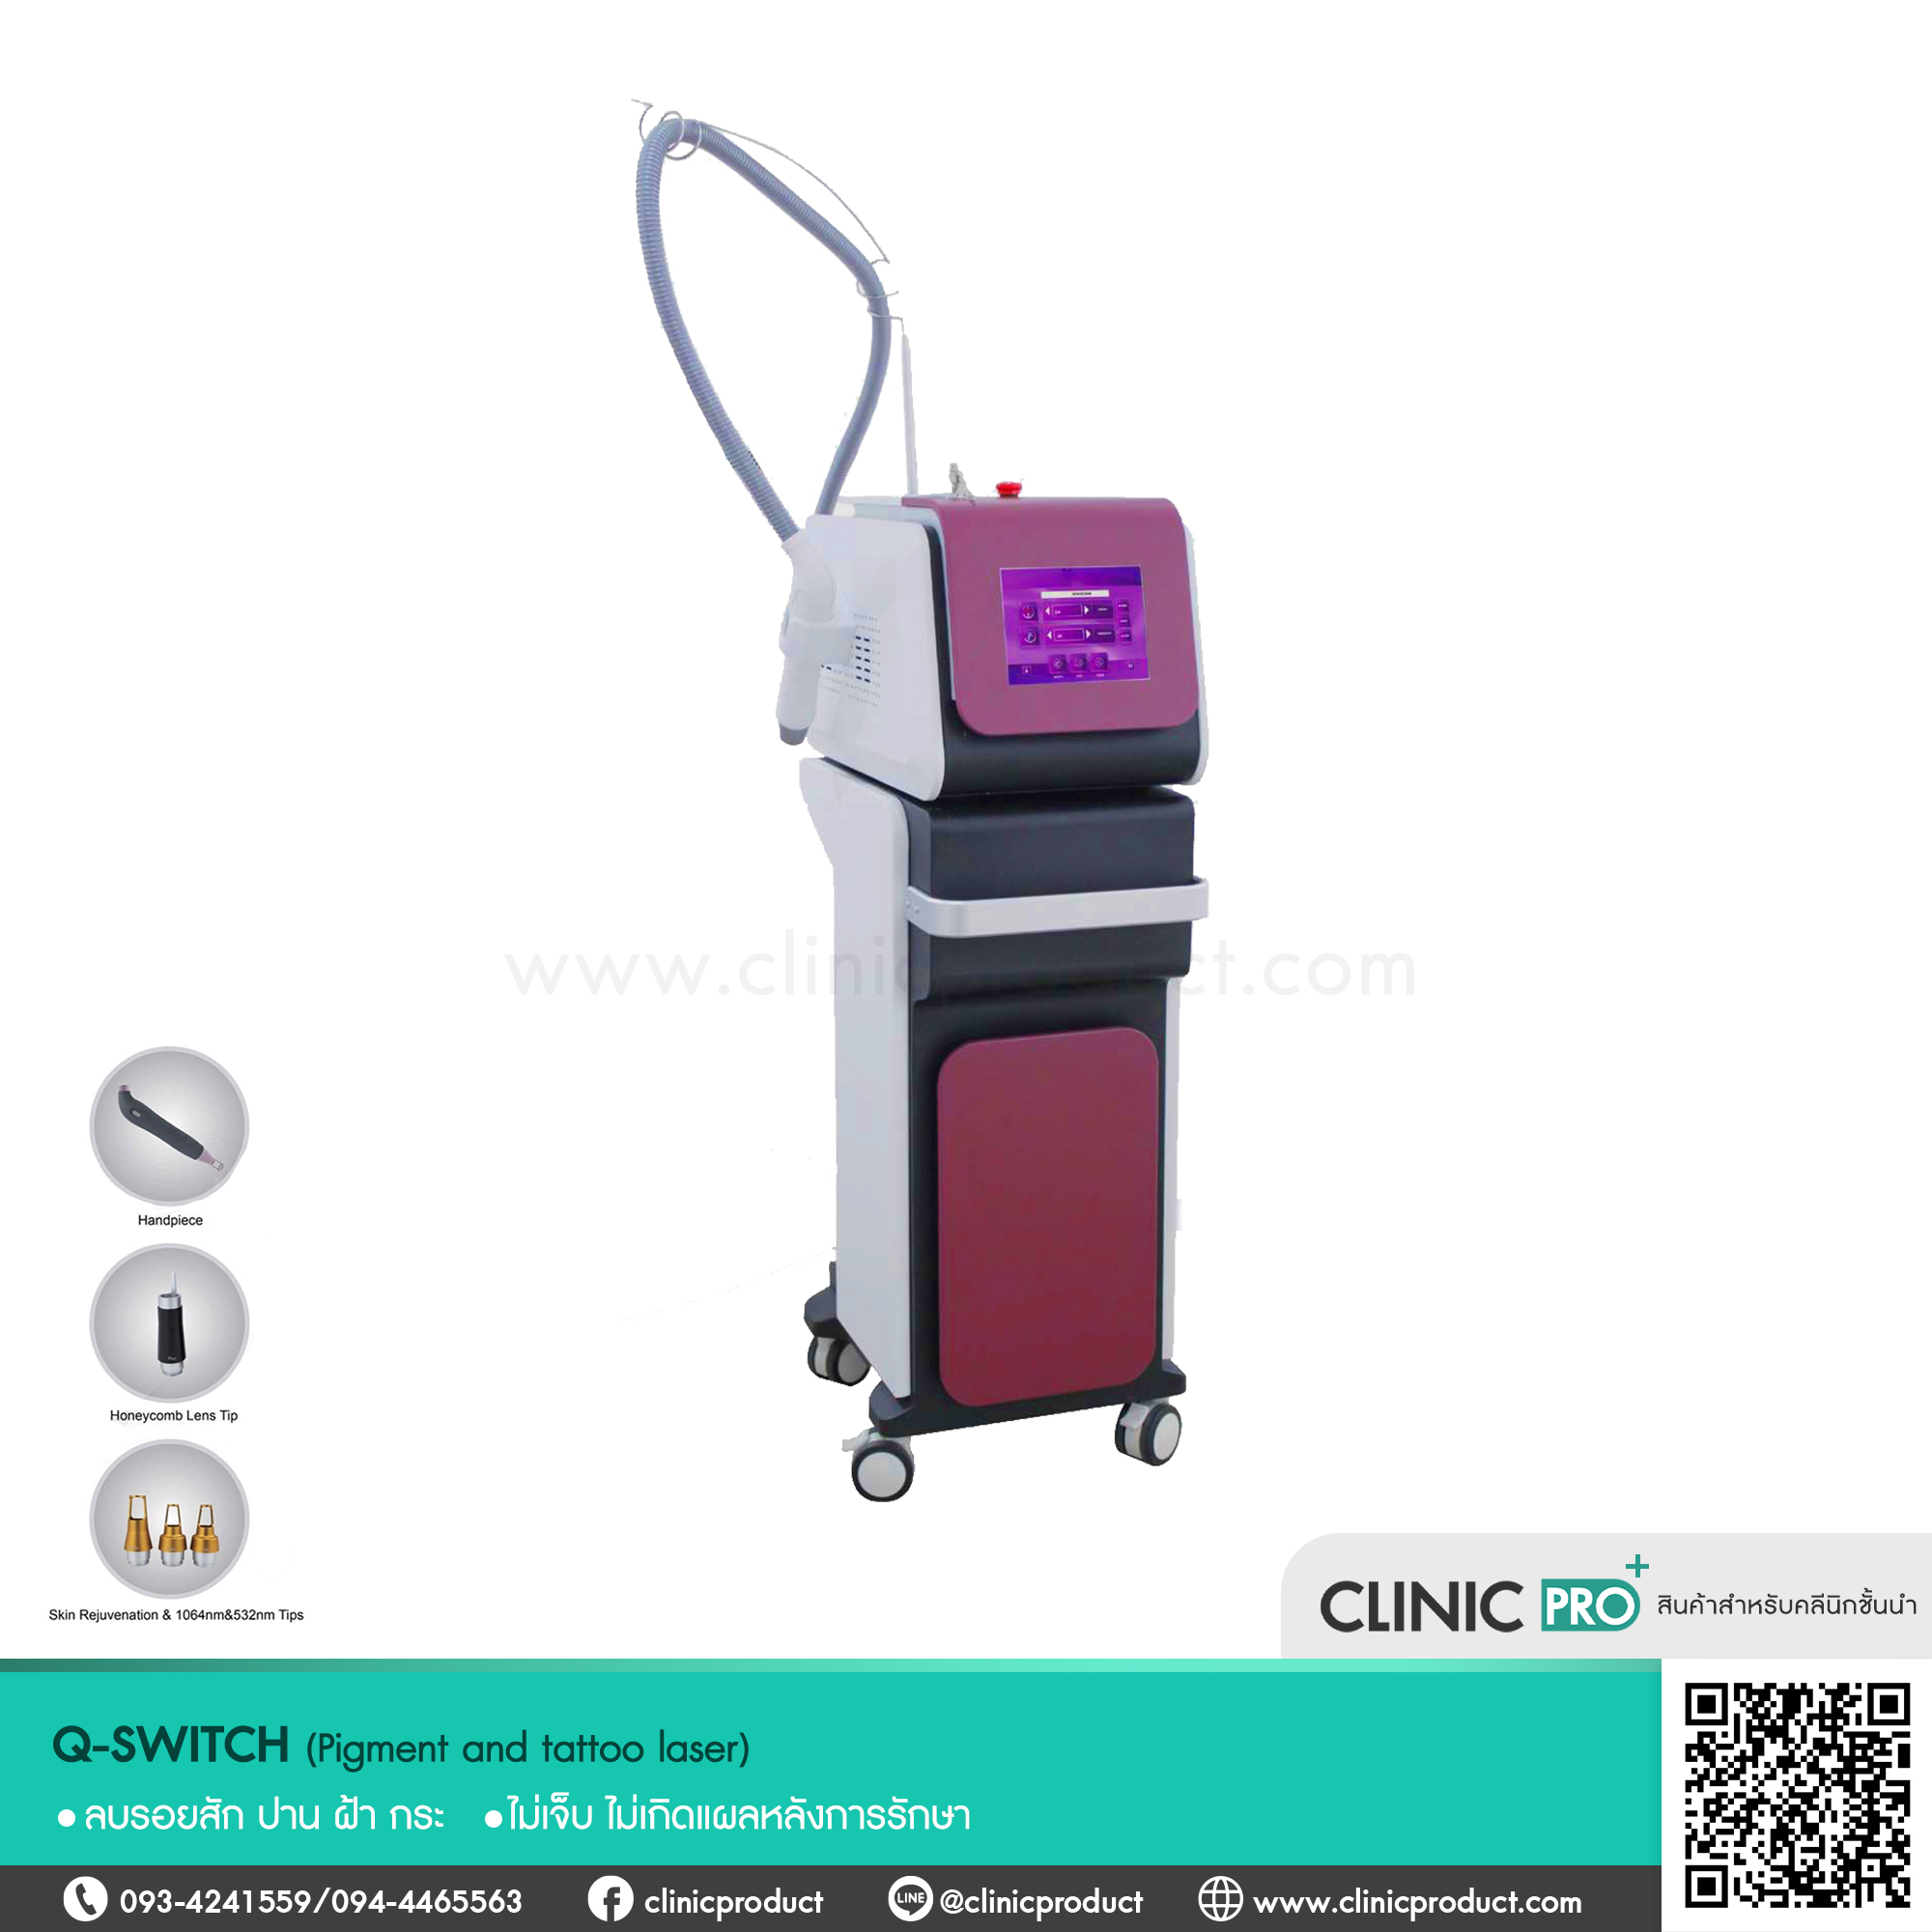 Q-SWITCH ( Pigment and Tattoo Laser )